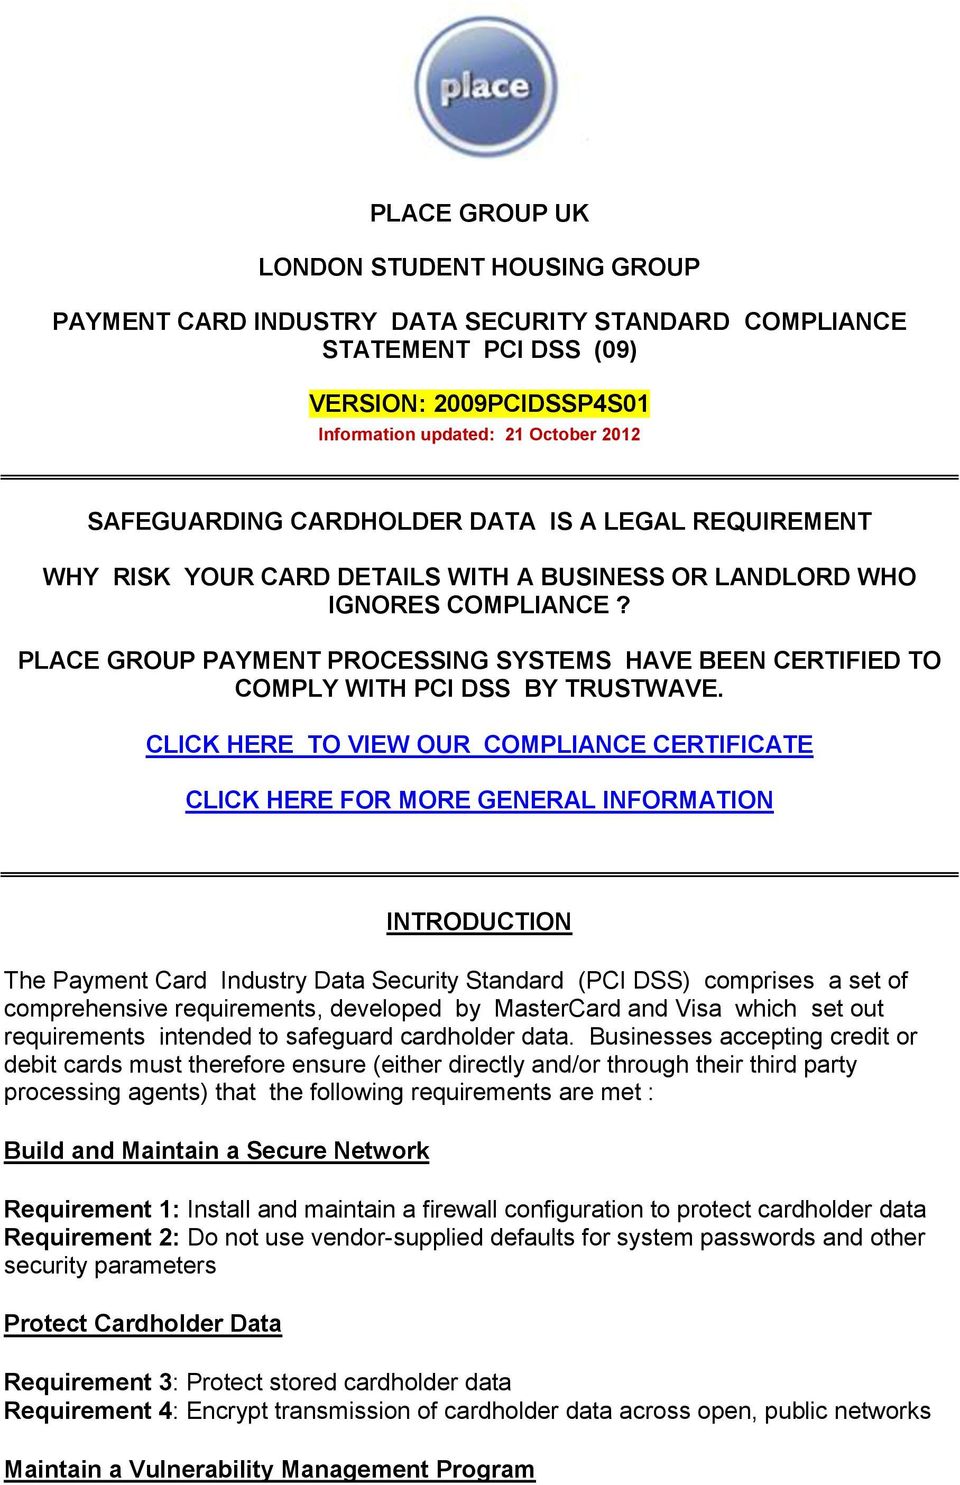 PLACE GROUP PAYMENT PROCESSING SYSTEMS HAVE BEEN CERTIFIED TO COMPLY WITH PCI DSS BY TRUSTWAVE.